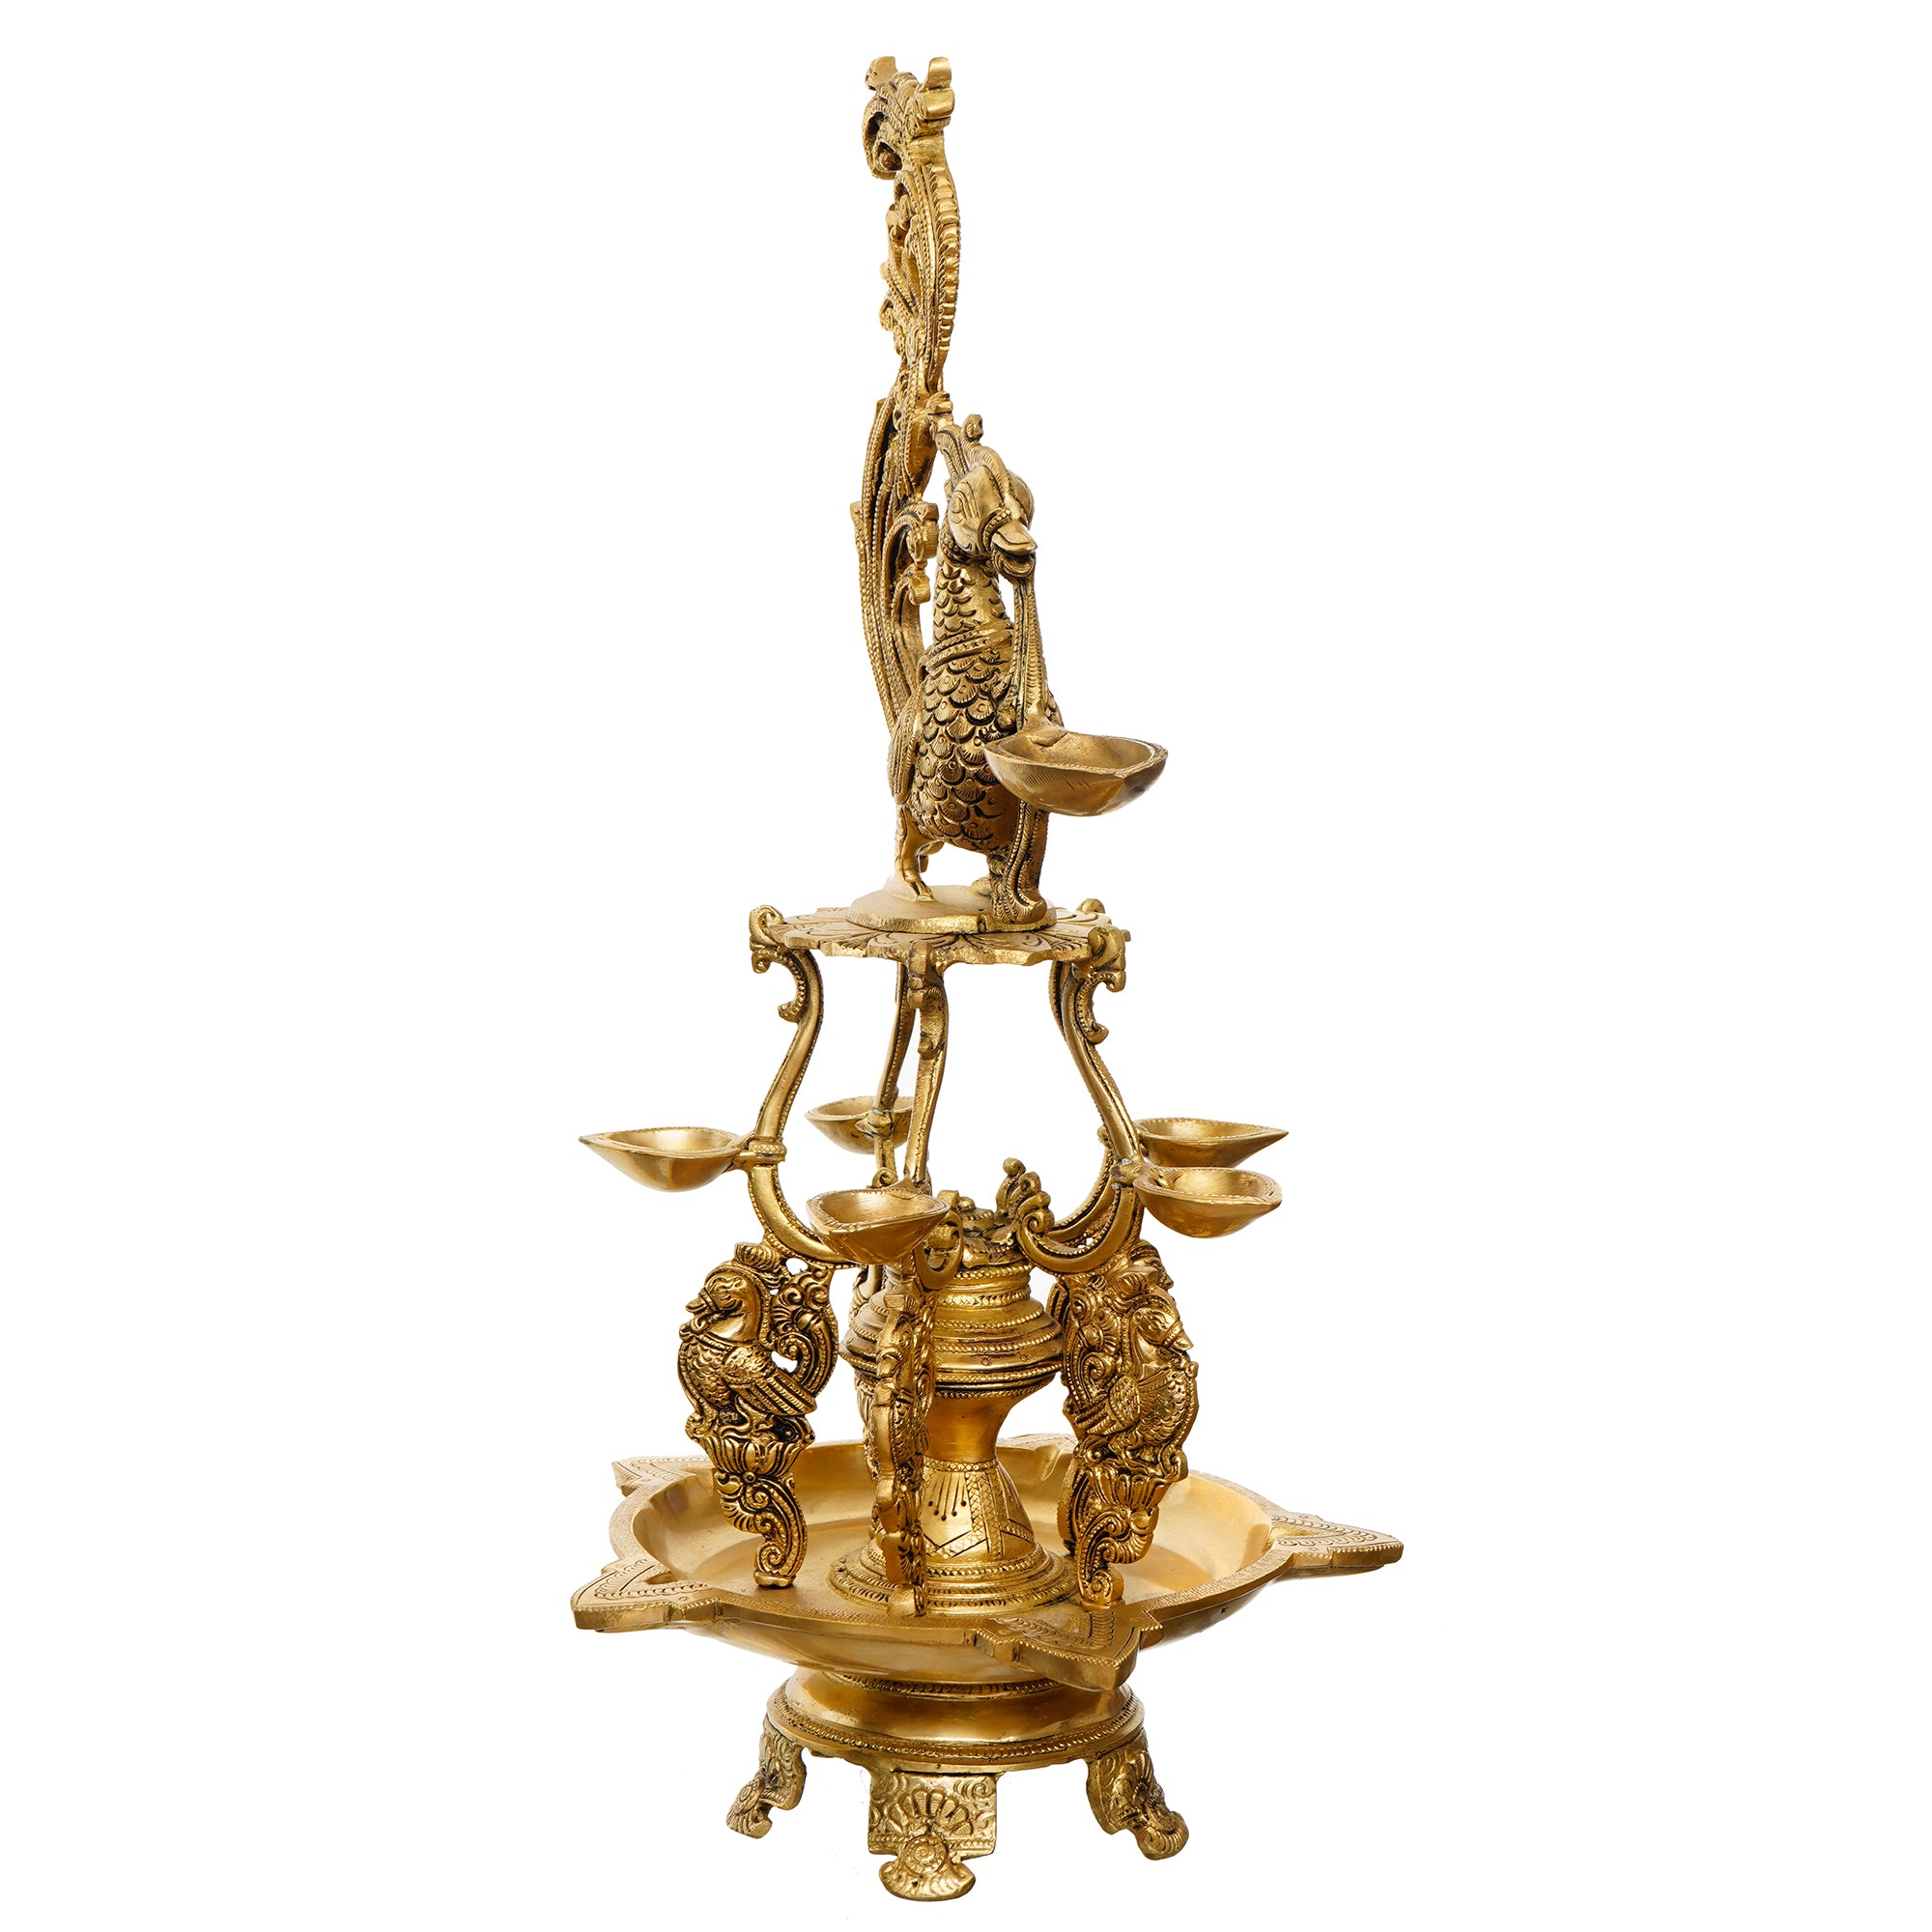 Golden Antique Finish Decorative Handcrafted Brass Peacock Showpiece with Brass Diyas for 11 Wicks and Stand 6